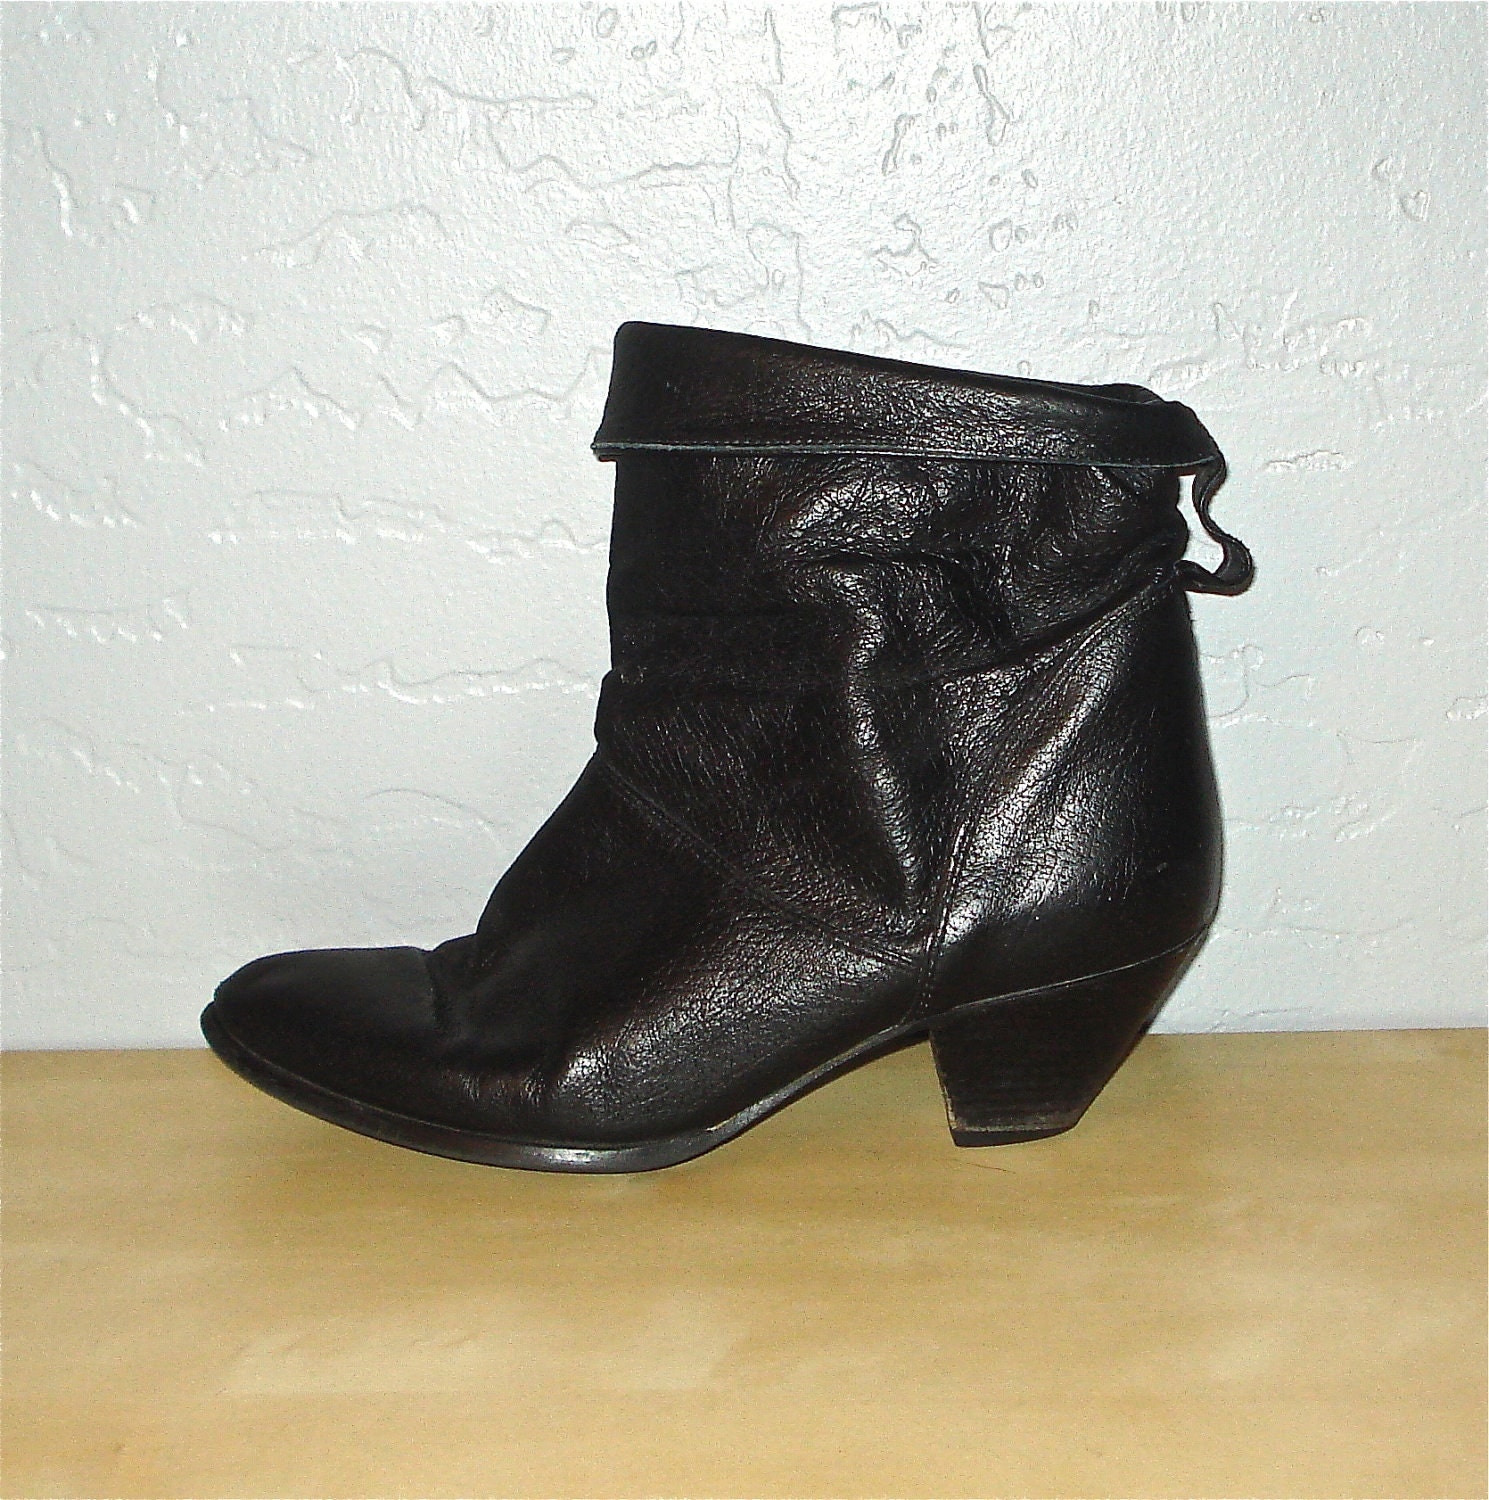 Vintage 80s black leather ANKLE BOOTS small heel fold over